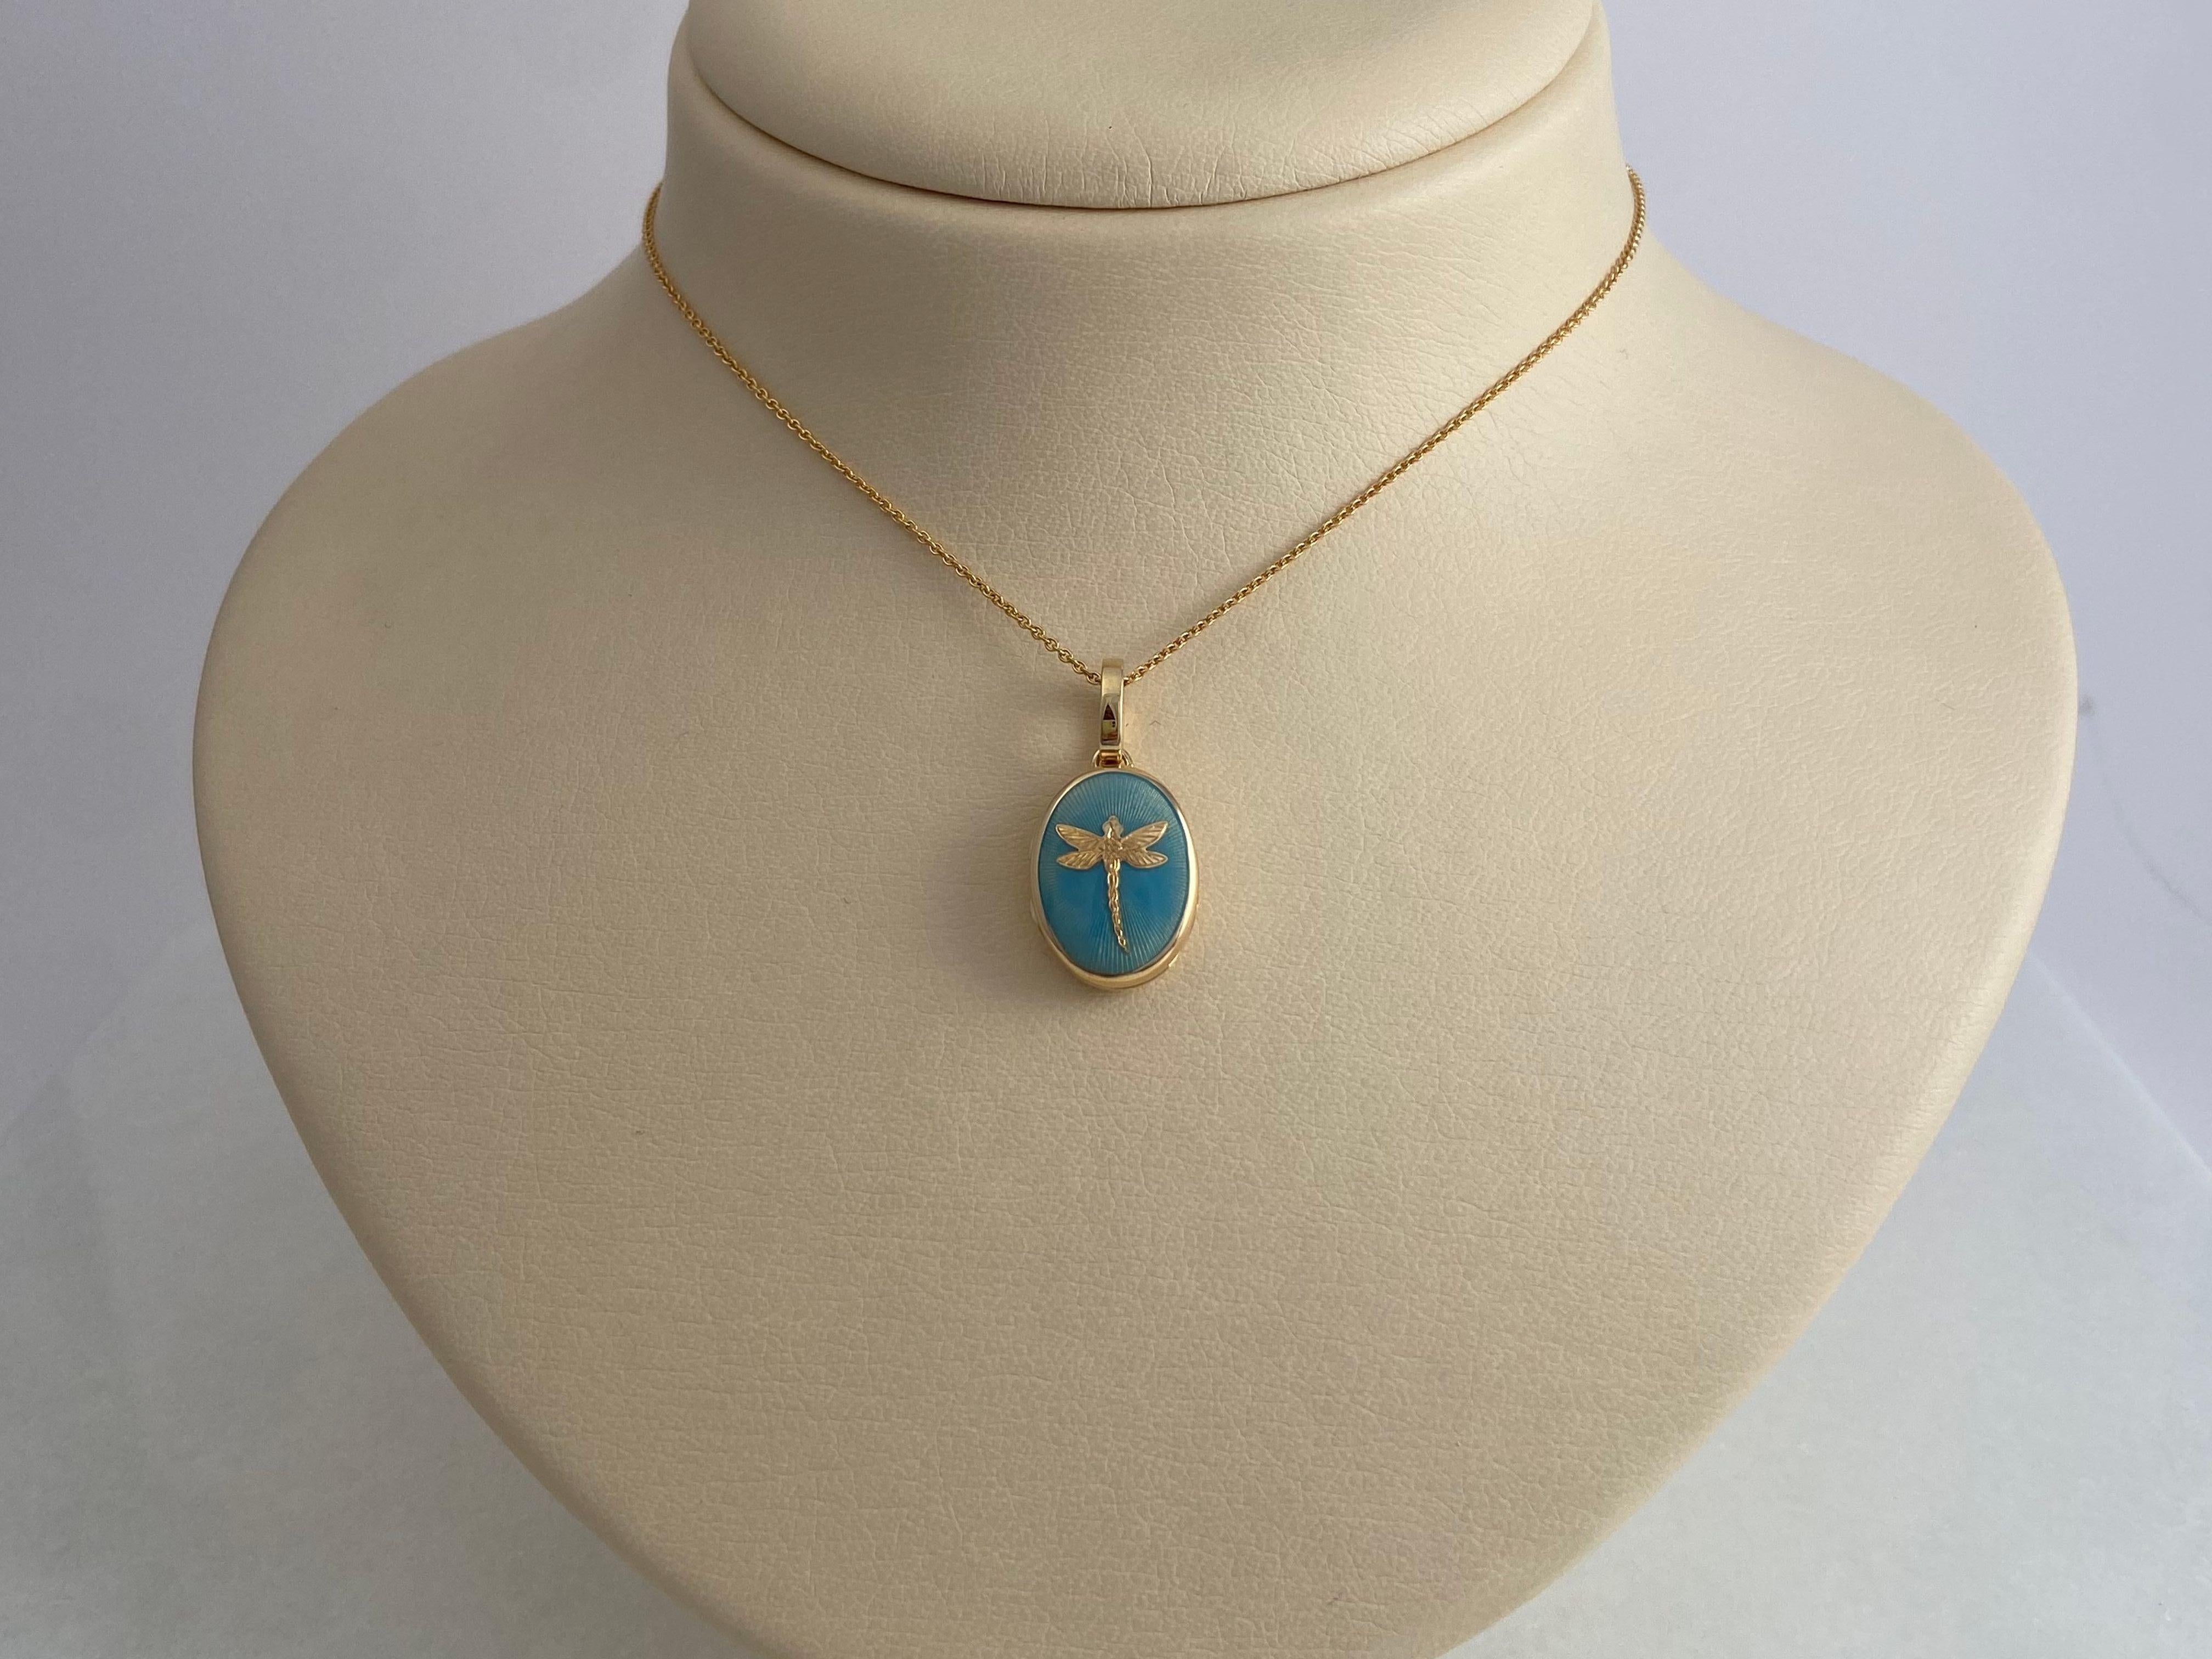 Oval Locket Pendant Necklace Dragonfly 18k Yellow Gold Turquoise Enamel For Sale 2